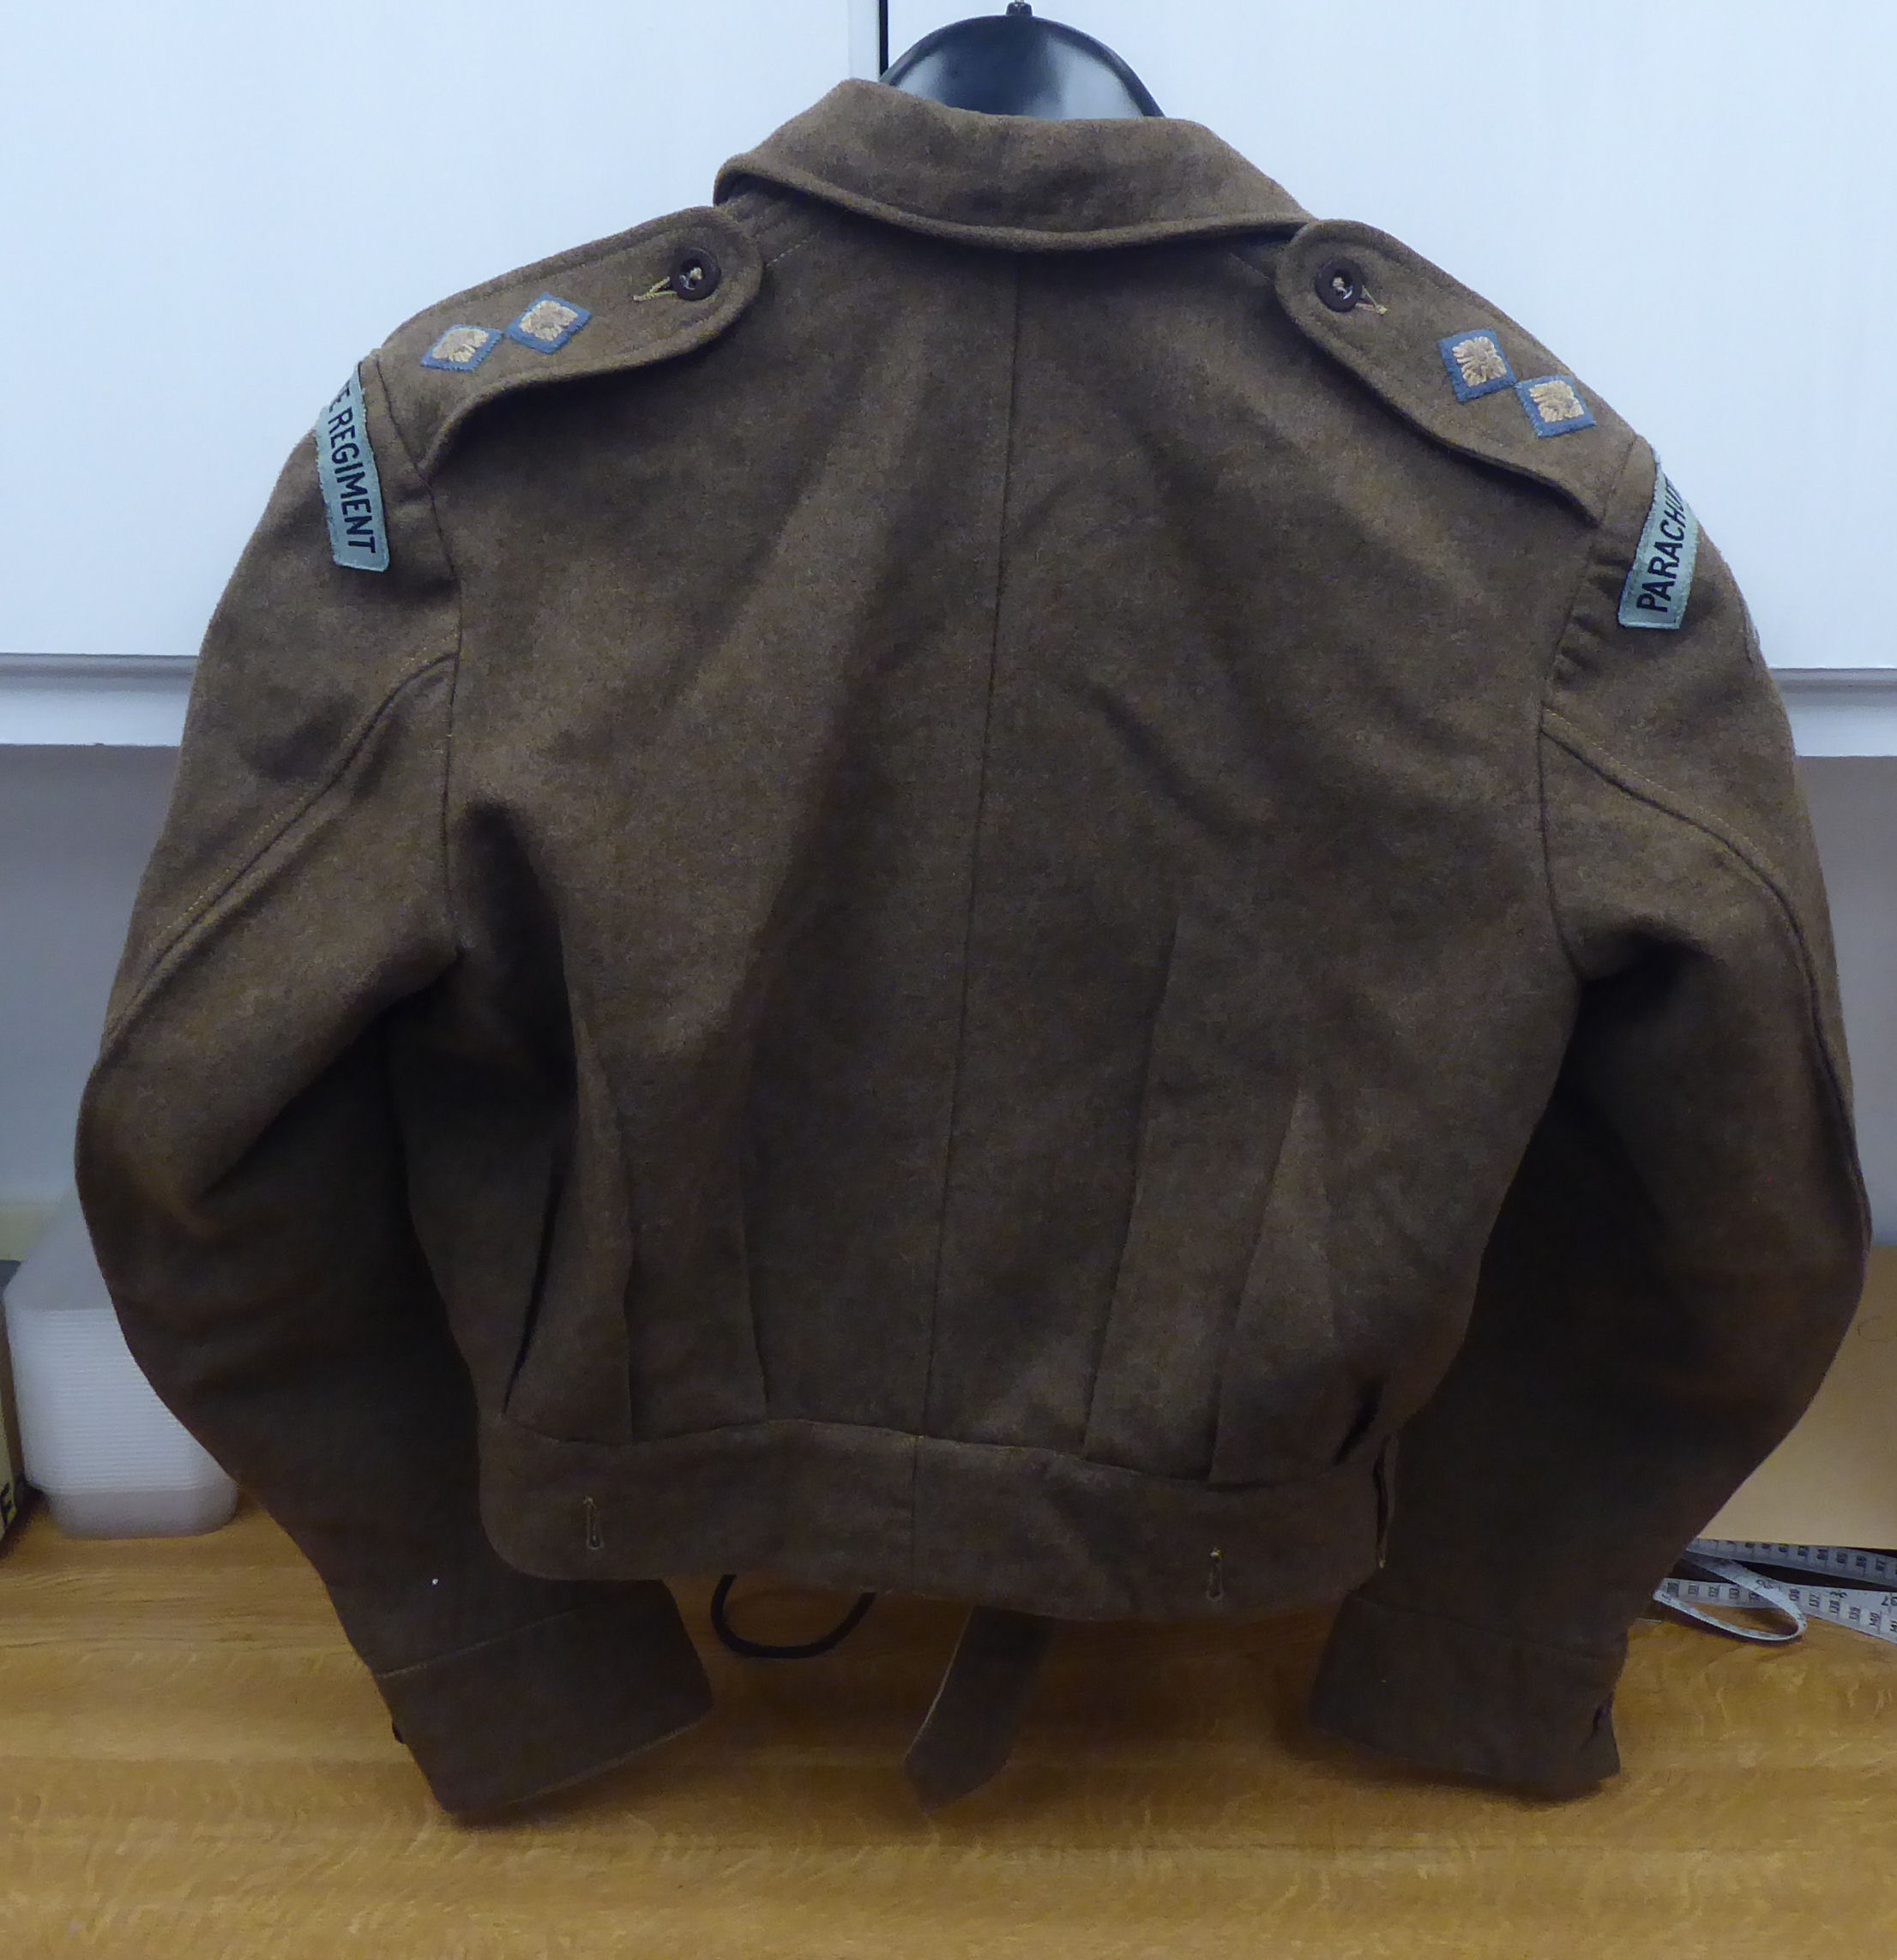 A 1943 dated British Parachute Regiment officers battledress with a lanyard and a pair of - Image 3 of 14